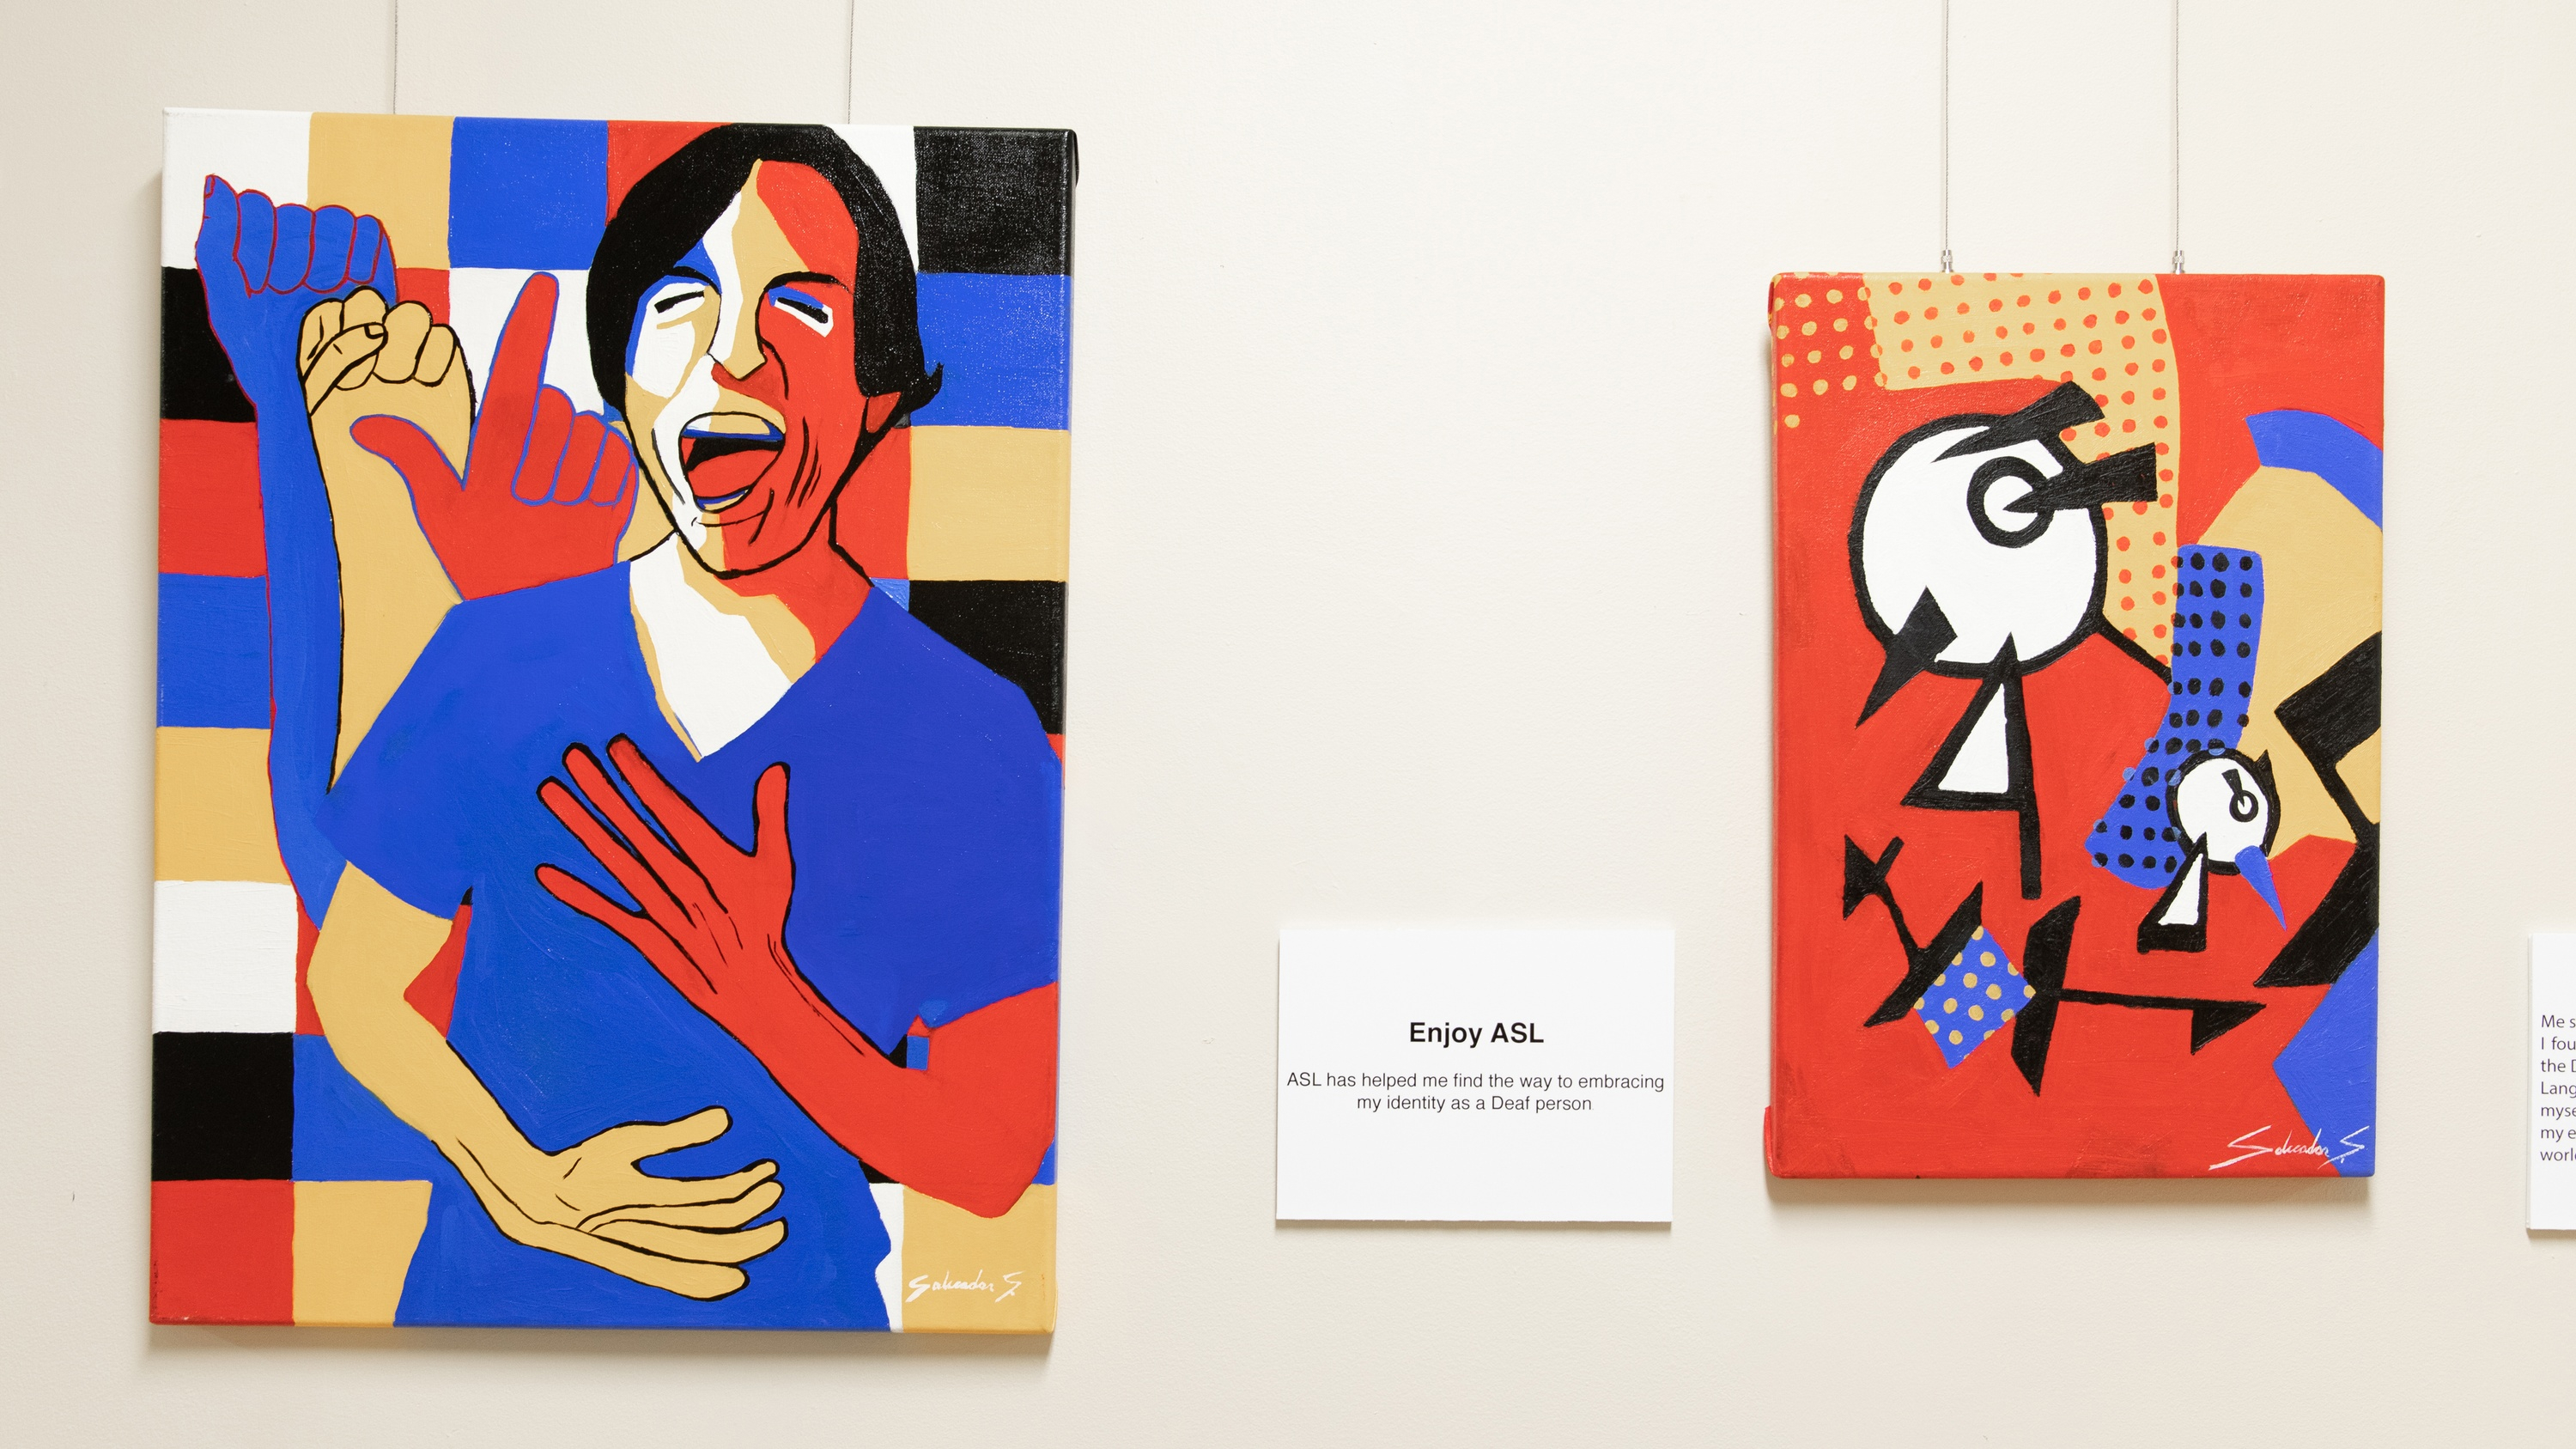 Two bright graphic images - on the left, a man in the foreground in a blue shirt laughs. Behind him are the ASL hand-letters: ASL. The picture is titled "Enjoy ASL" with a subheader: ASL has helped me find the way to embracing my identity as a Deaf person.  The image to the right is abstract, with white circles outlined boldly in black, suggesting figures, on a blue, yellow and red graphic backgrounds.